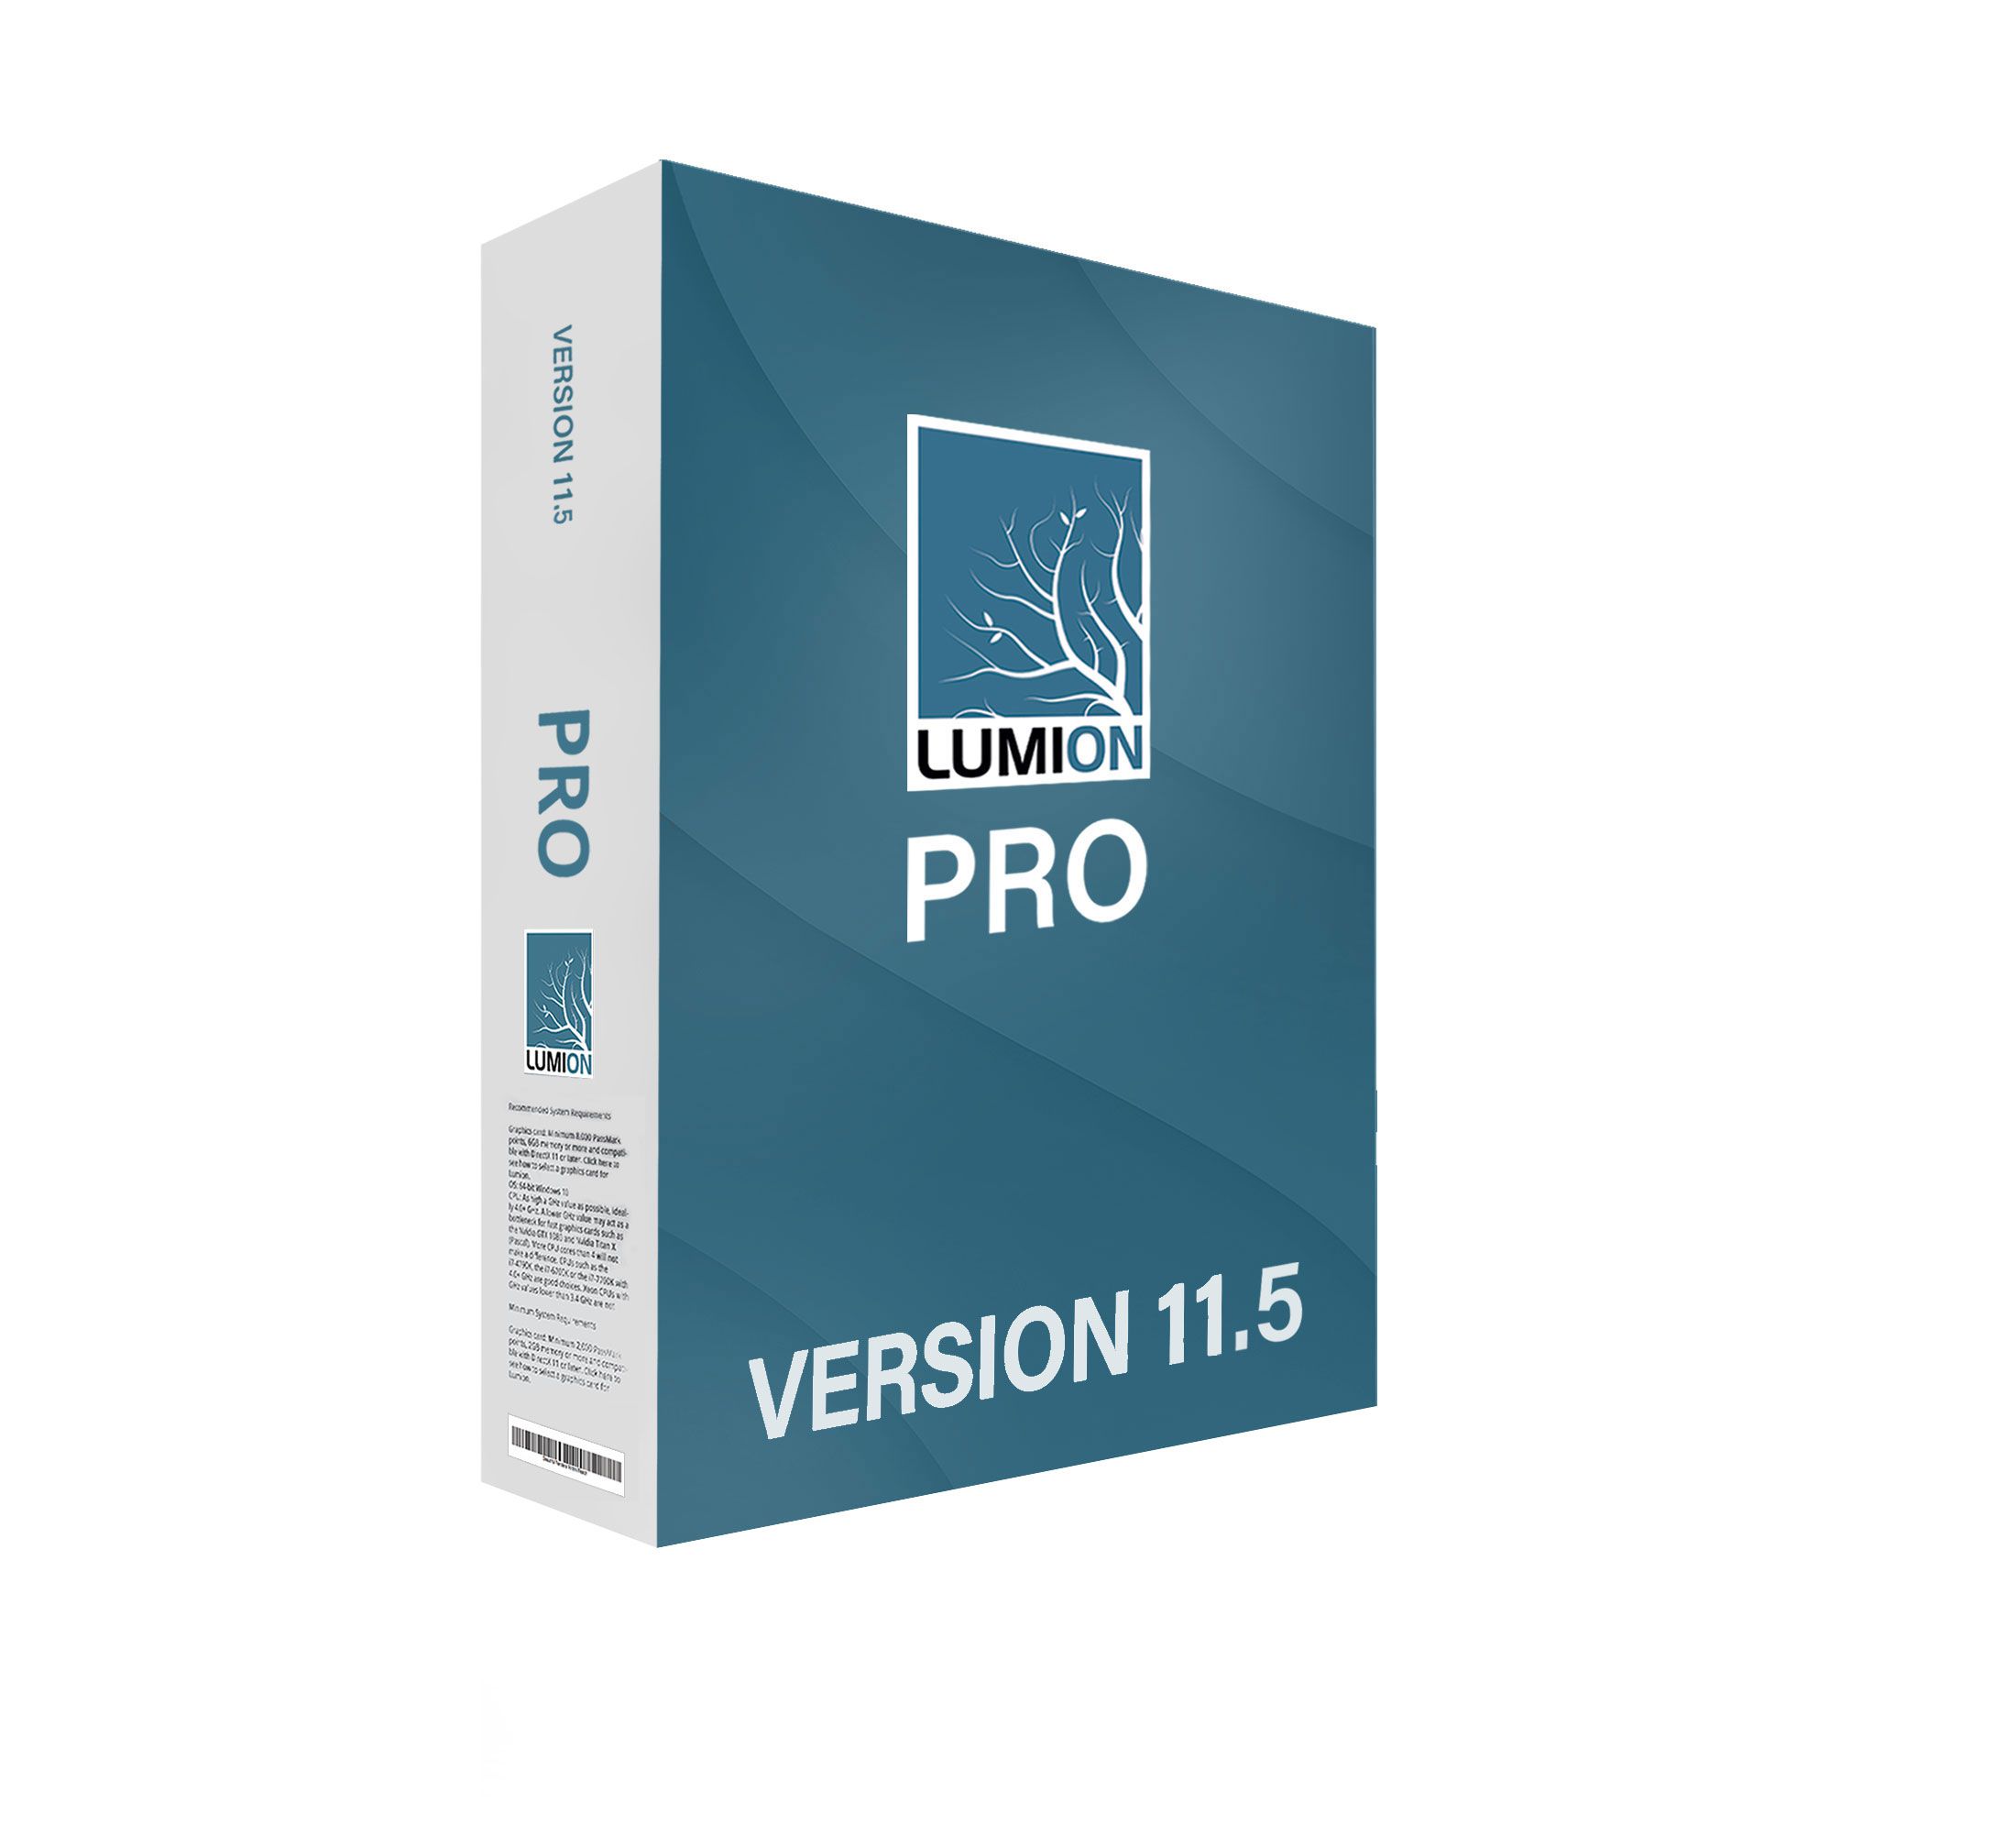 can you upgrade your lumion 8.5 to pro now